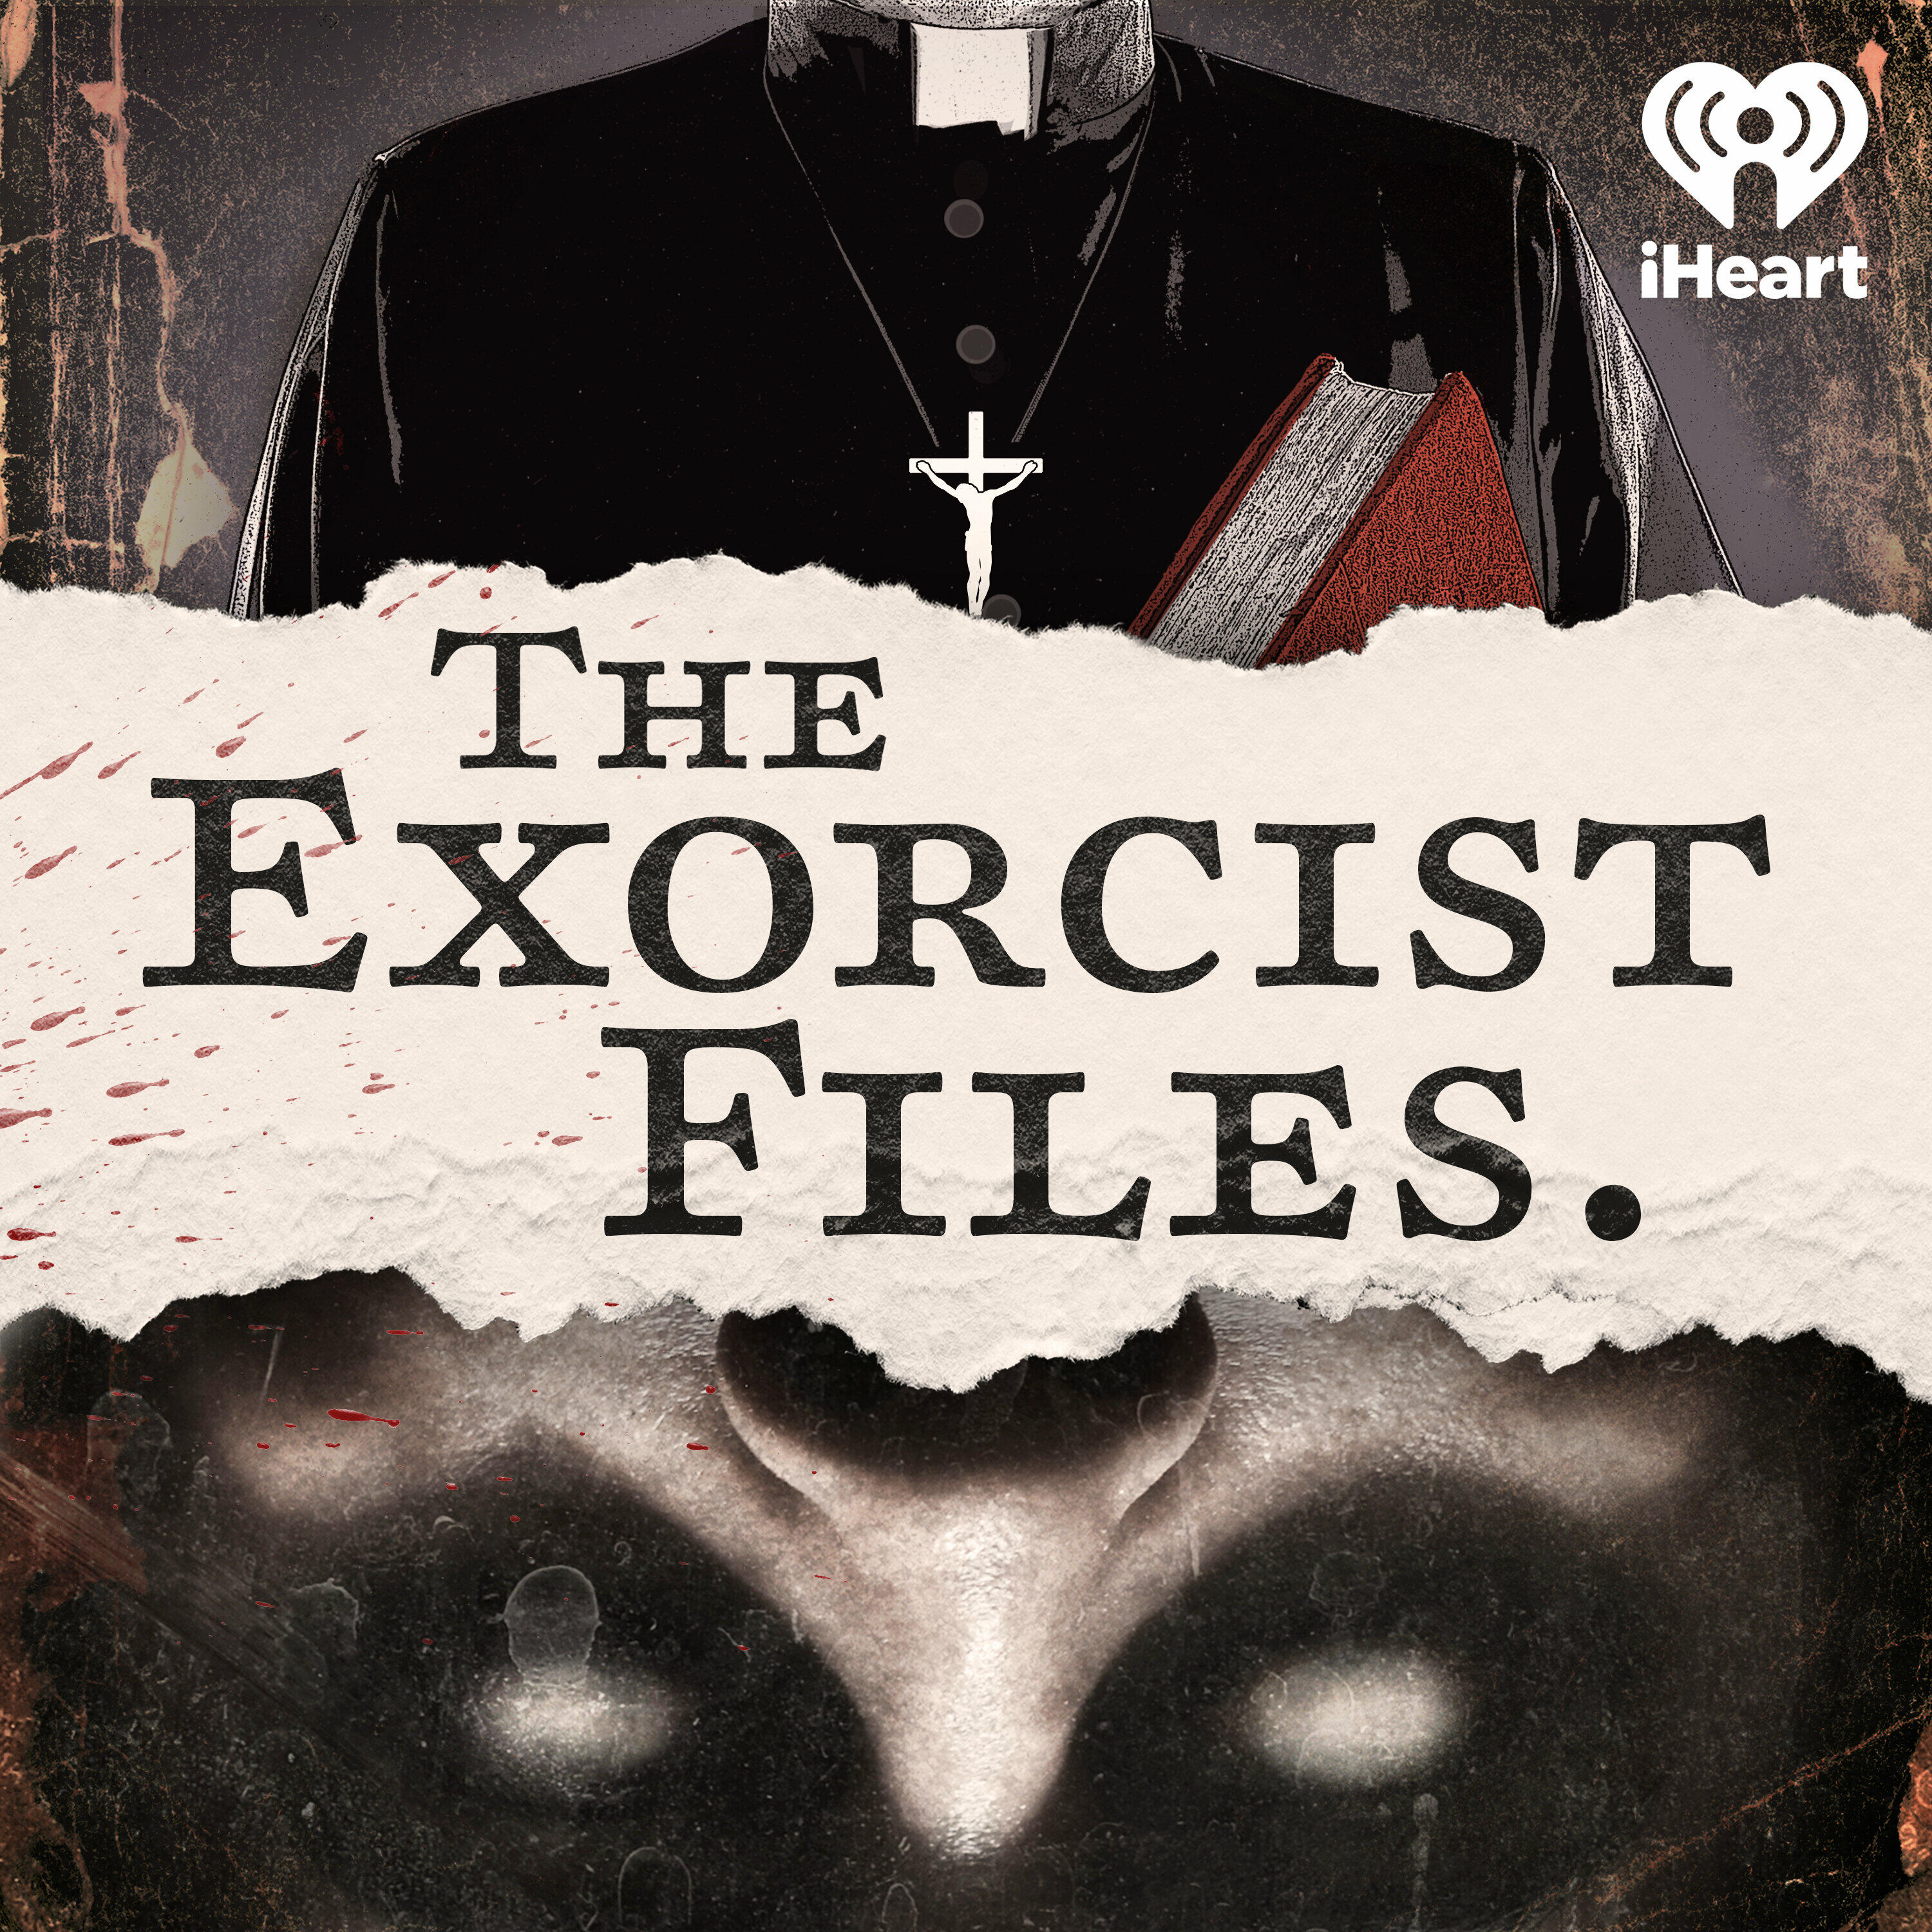 The Exorcist Files iHeart